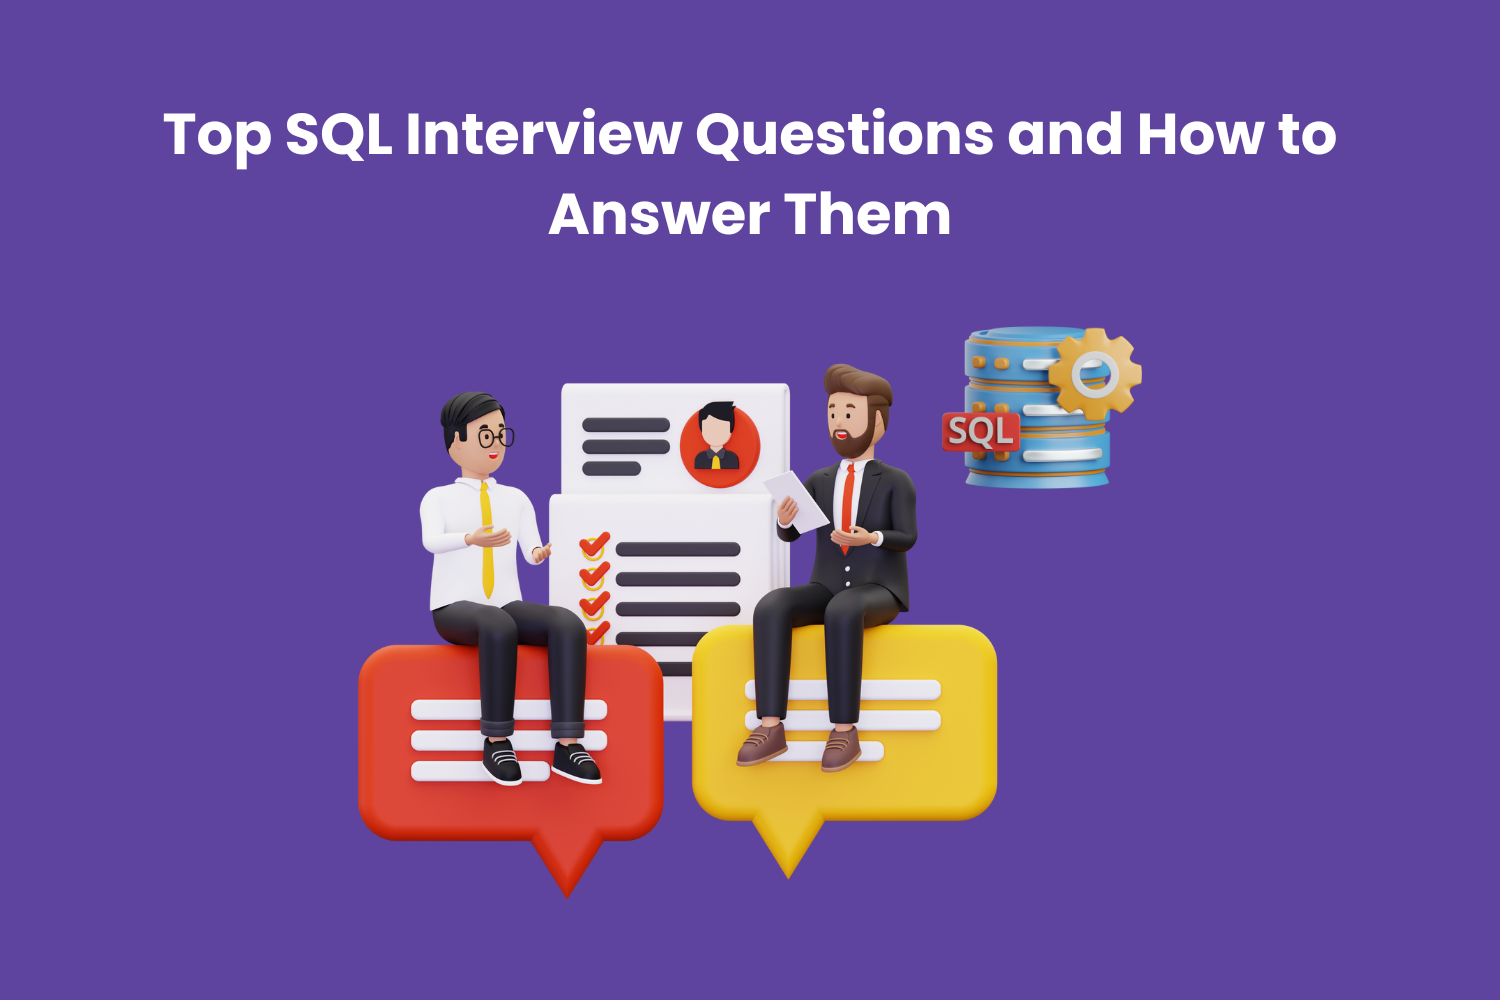 Top SQL Interview Questions and How to Answer Them